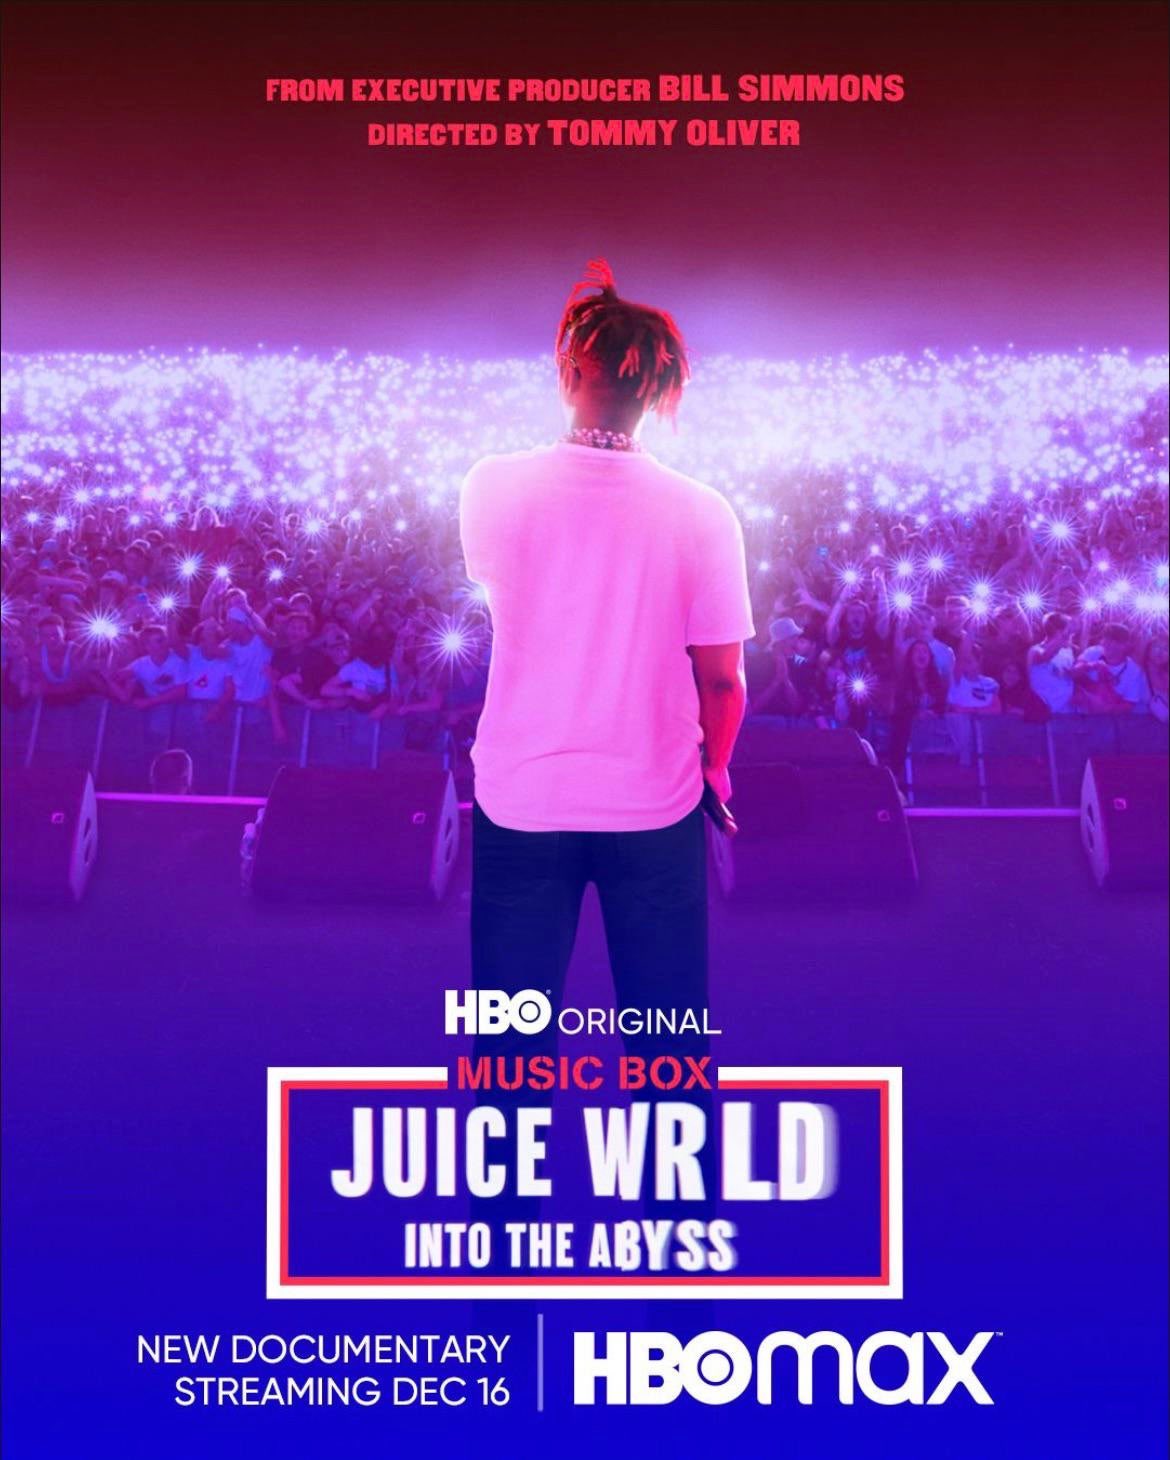 Nathan WRLD Into The Abyss wallpaper I made based off the documentary's poster! If you like this edit please consider leaving a like or following! #juicewrld #legendsneverdie #thepartyneverends #intotheabyss #